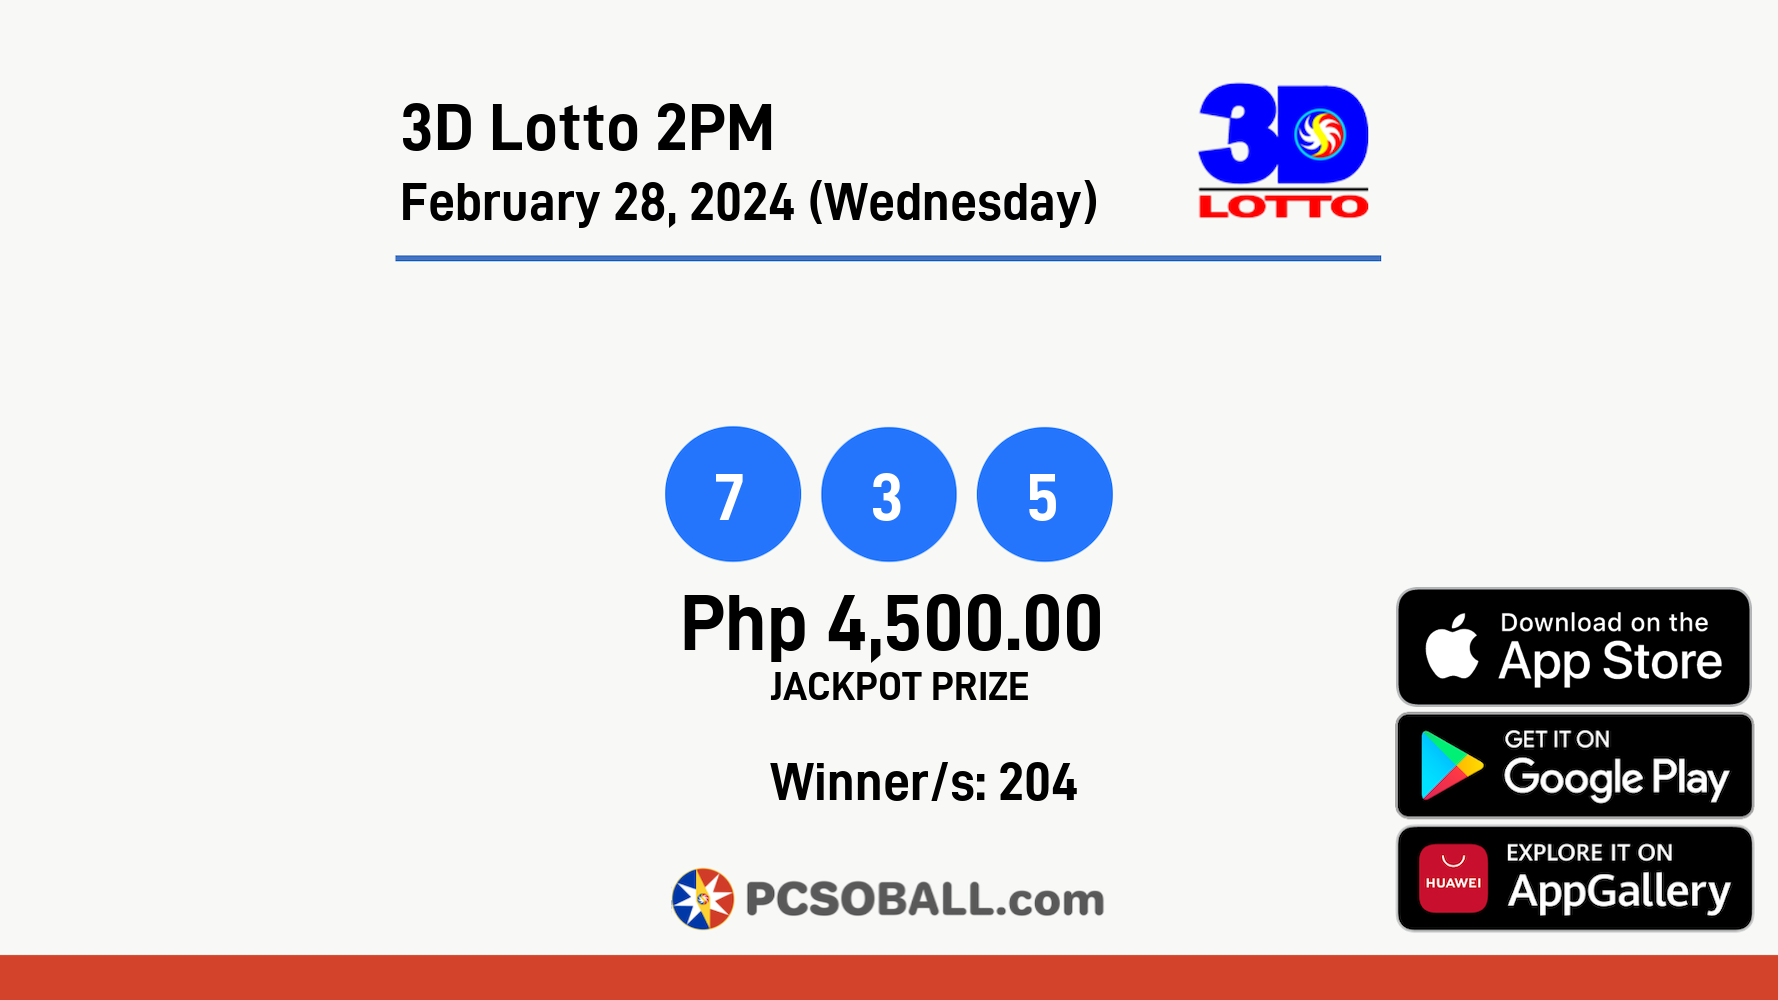 3D Lotto 2PM February 28, 2024 (Wednesday) Result